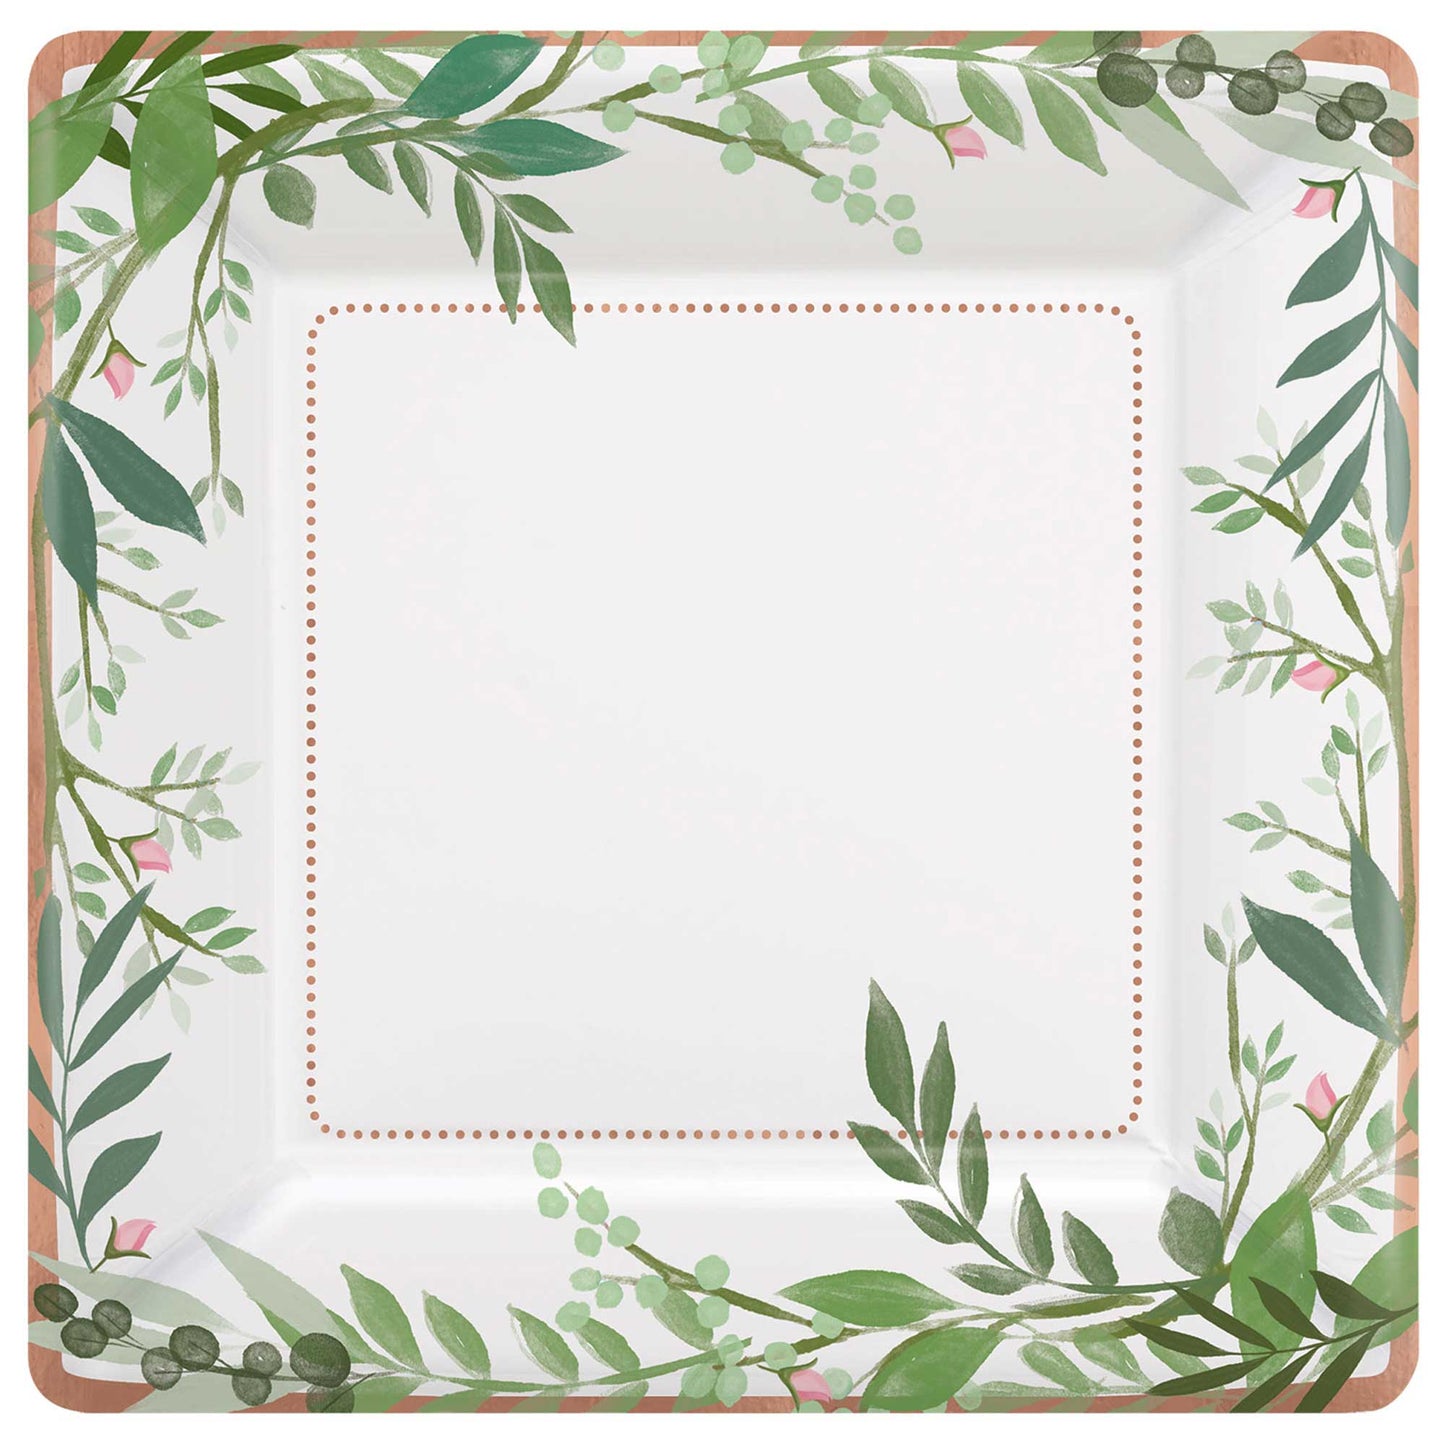 Love and Leaves 25cm Square Metallic Paper Plates